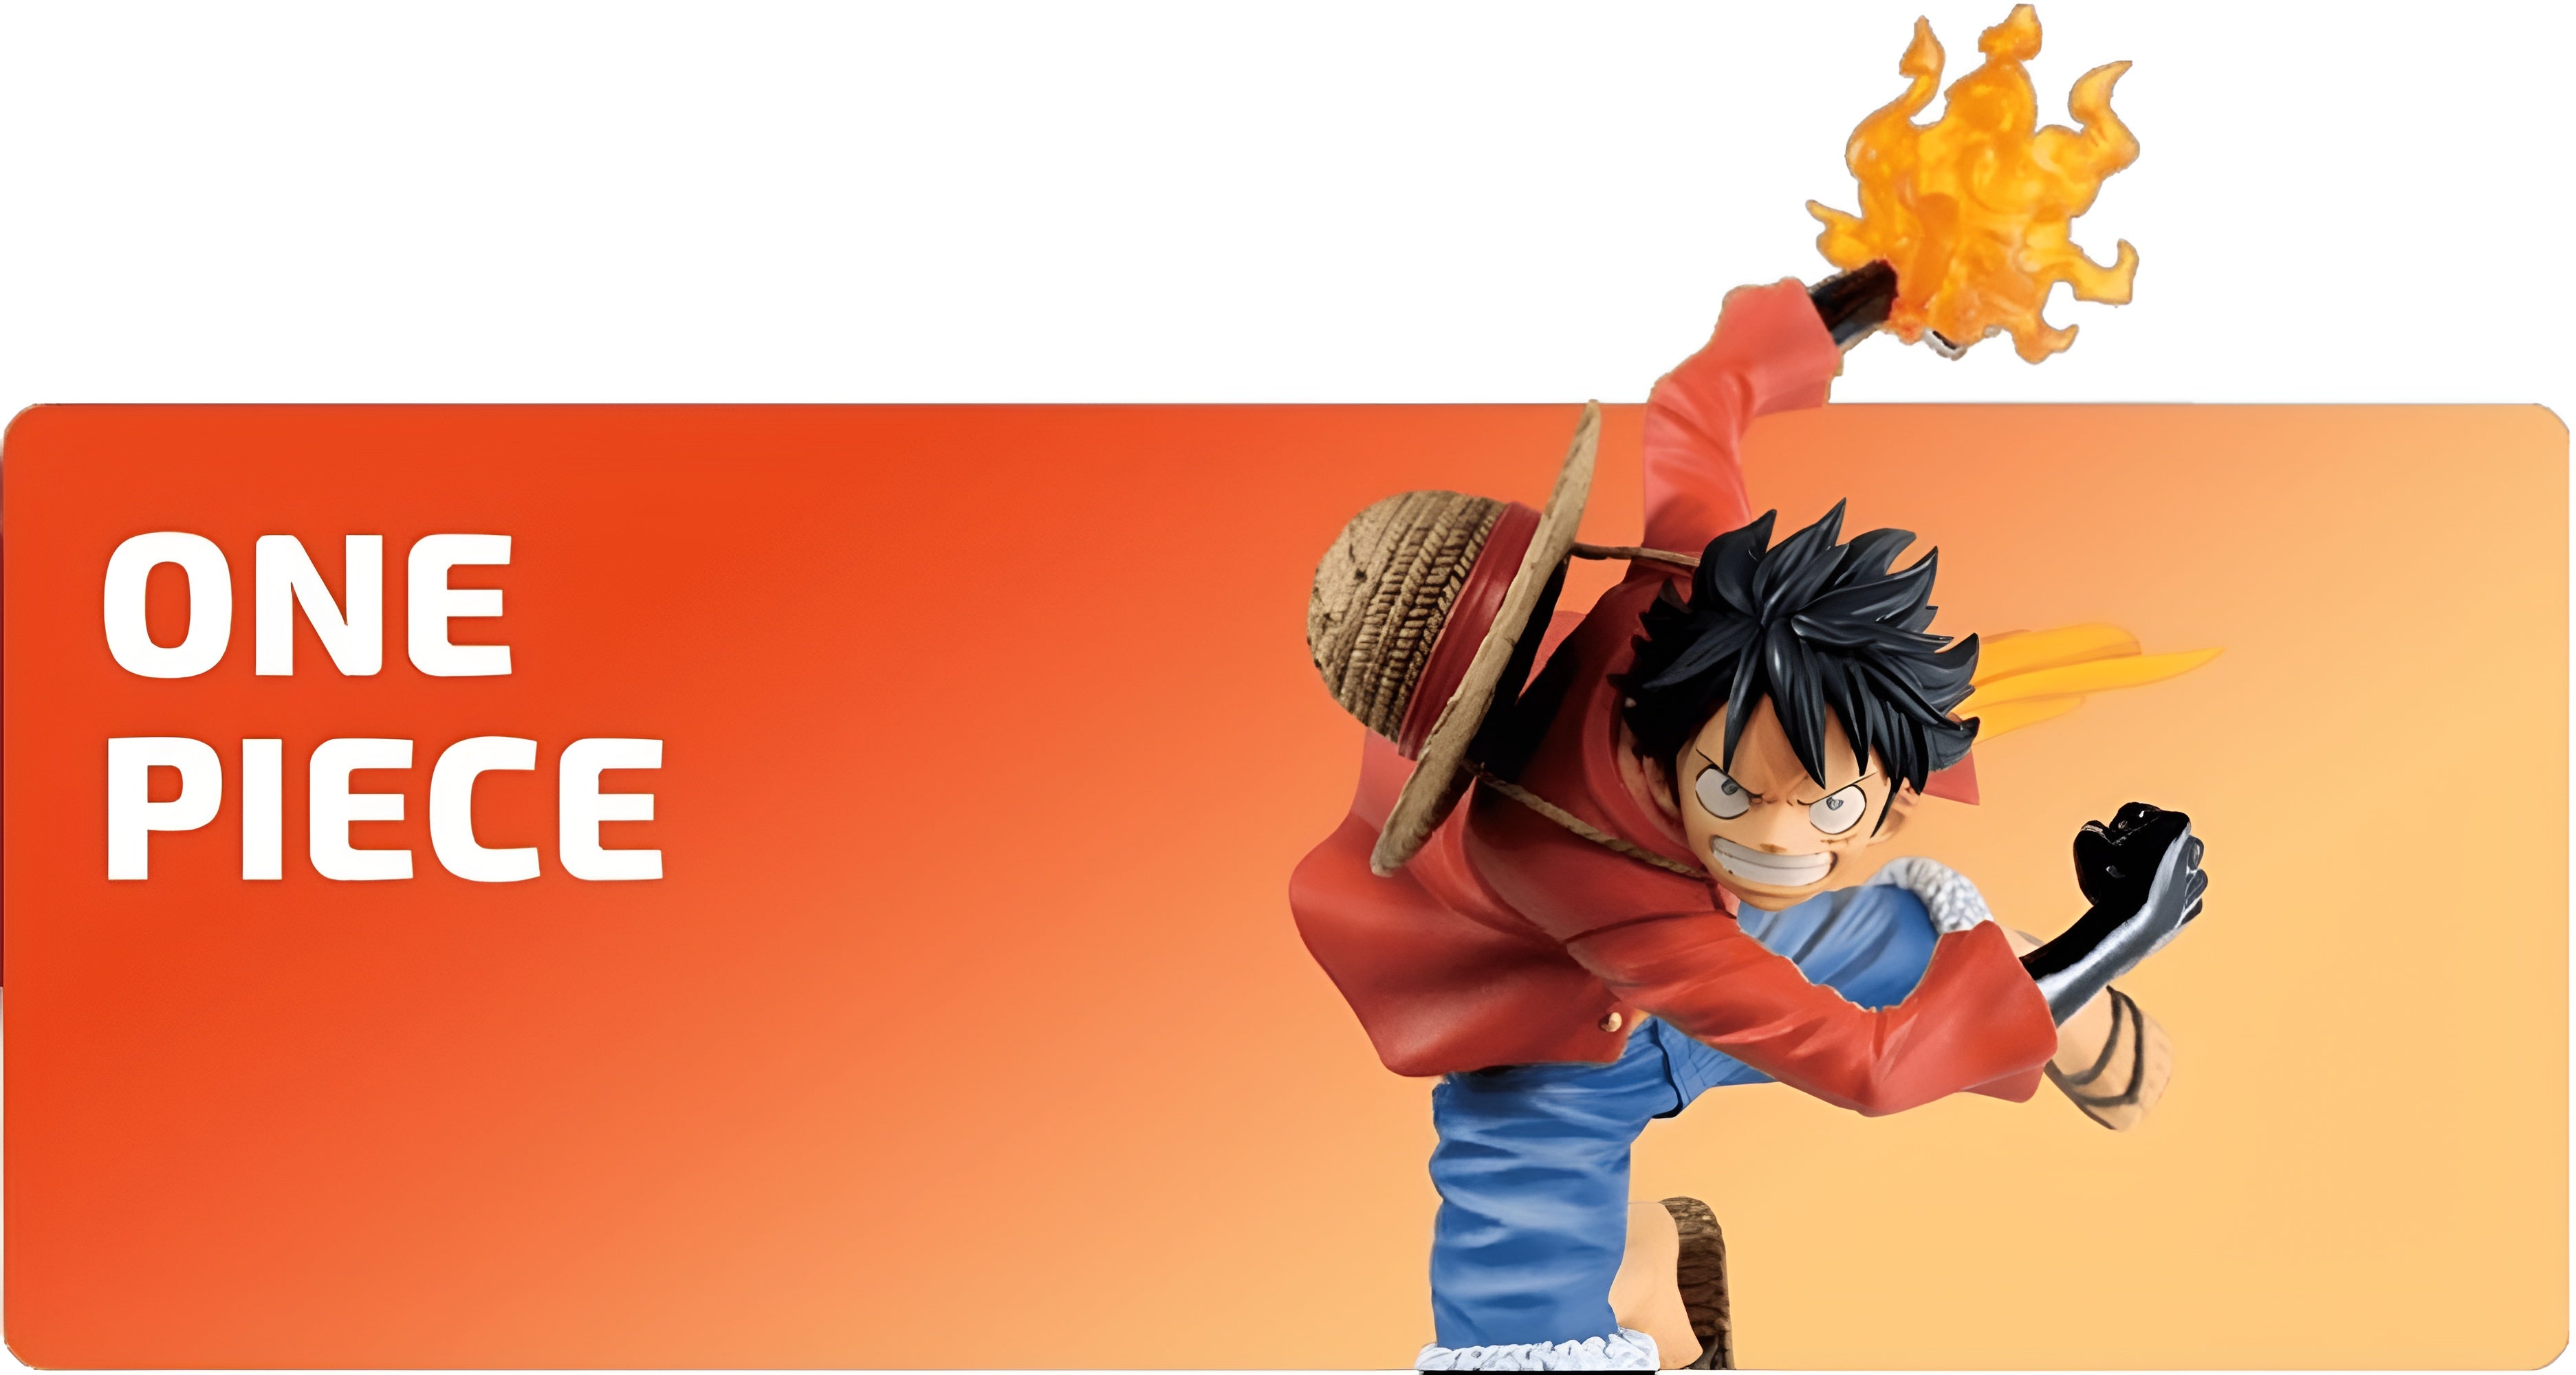 https://figurinemangafrance.fr/collections/one-piece